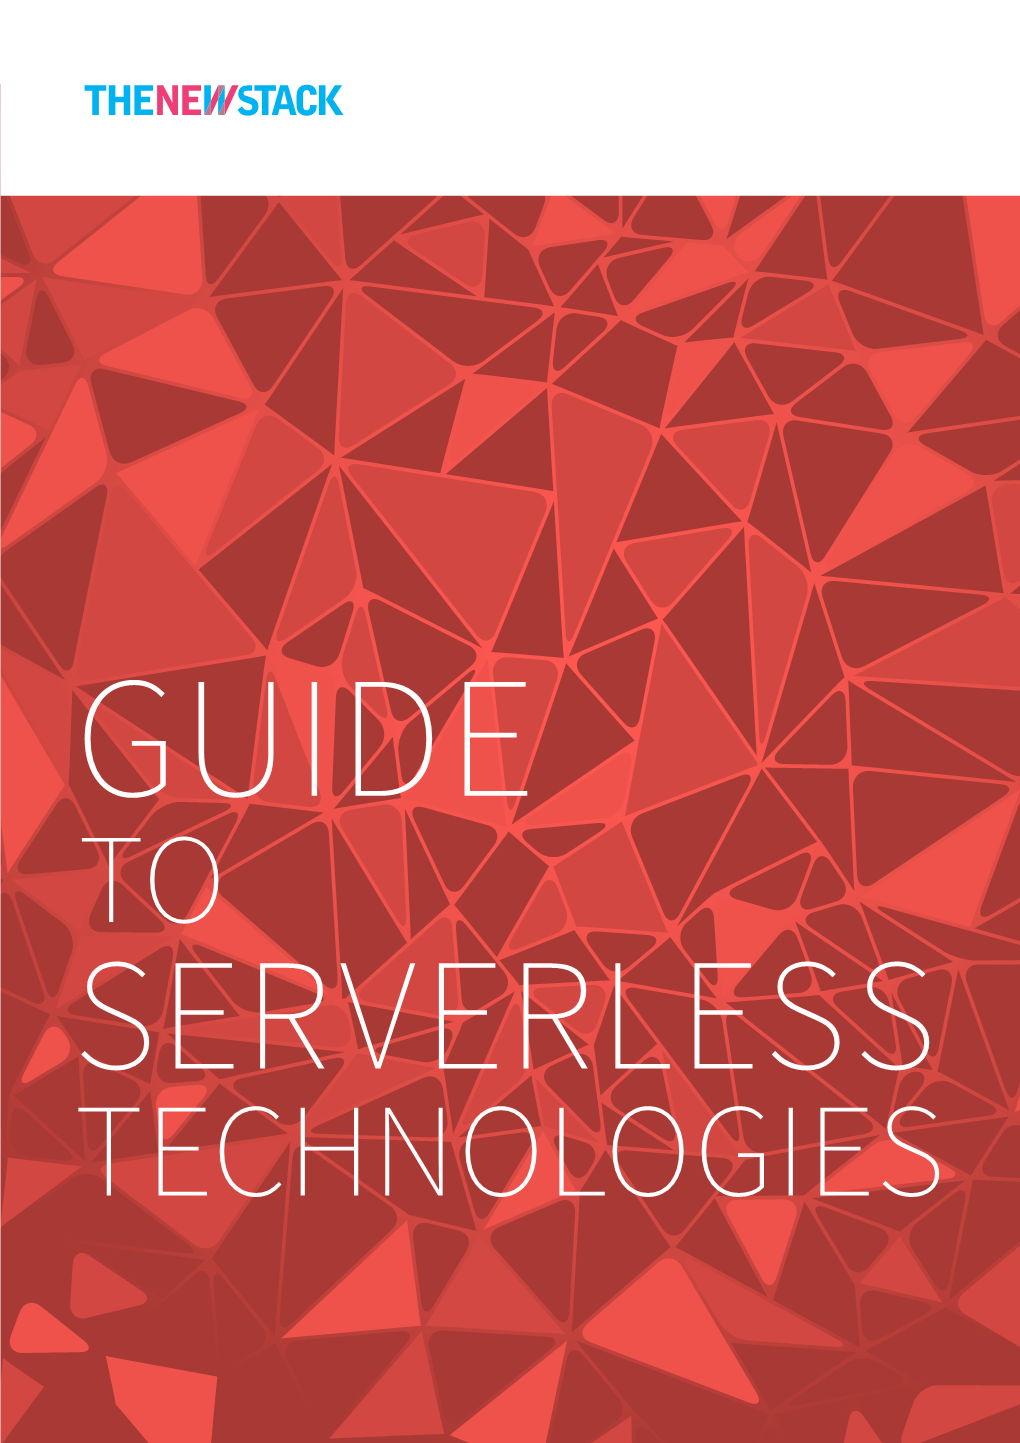 SERVERLESS TECHNOLOGIES the New Stack Guide to Serverless Technologies Alex Williams, Founder & Editor-In-Chief